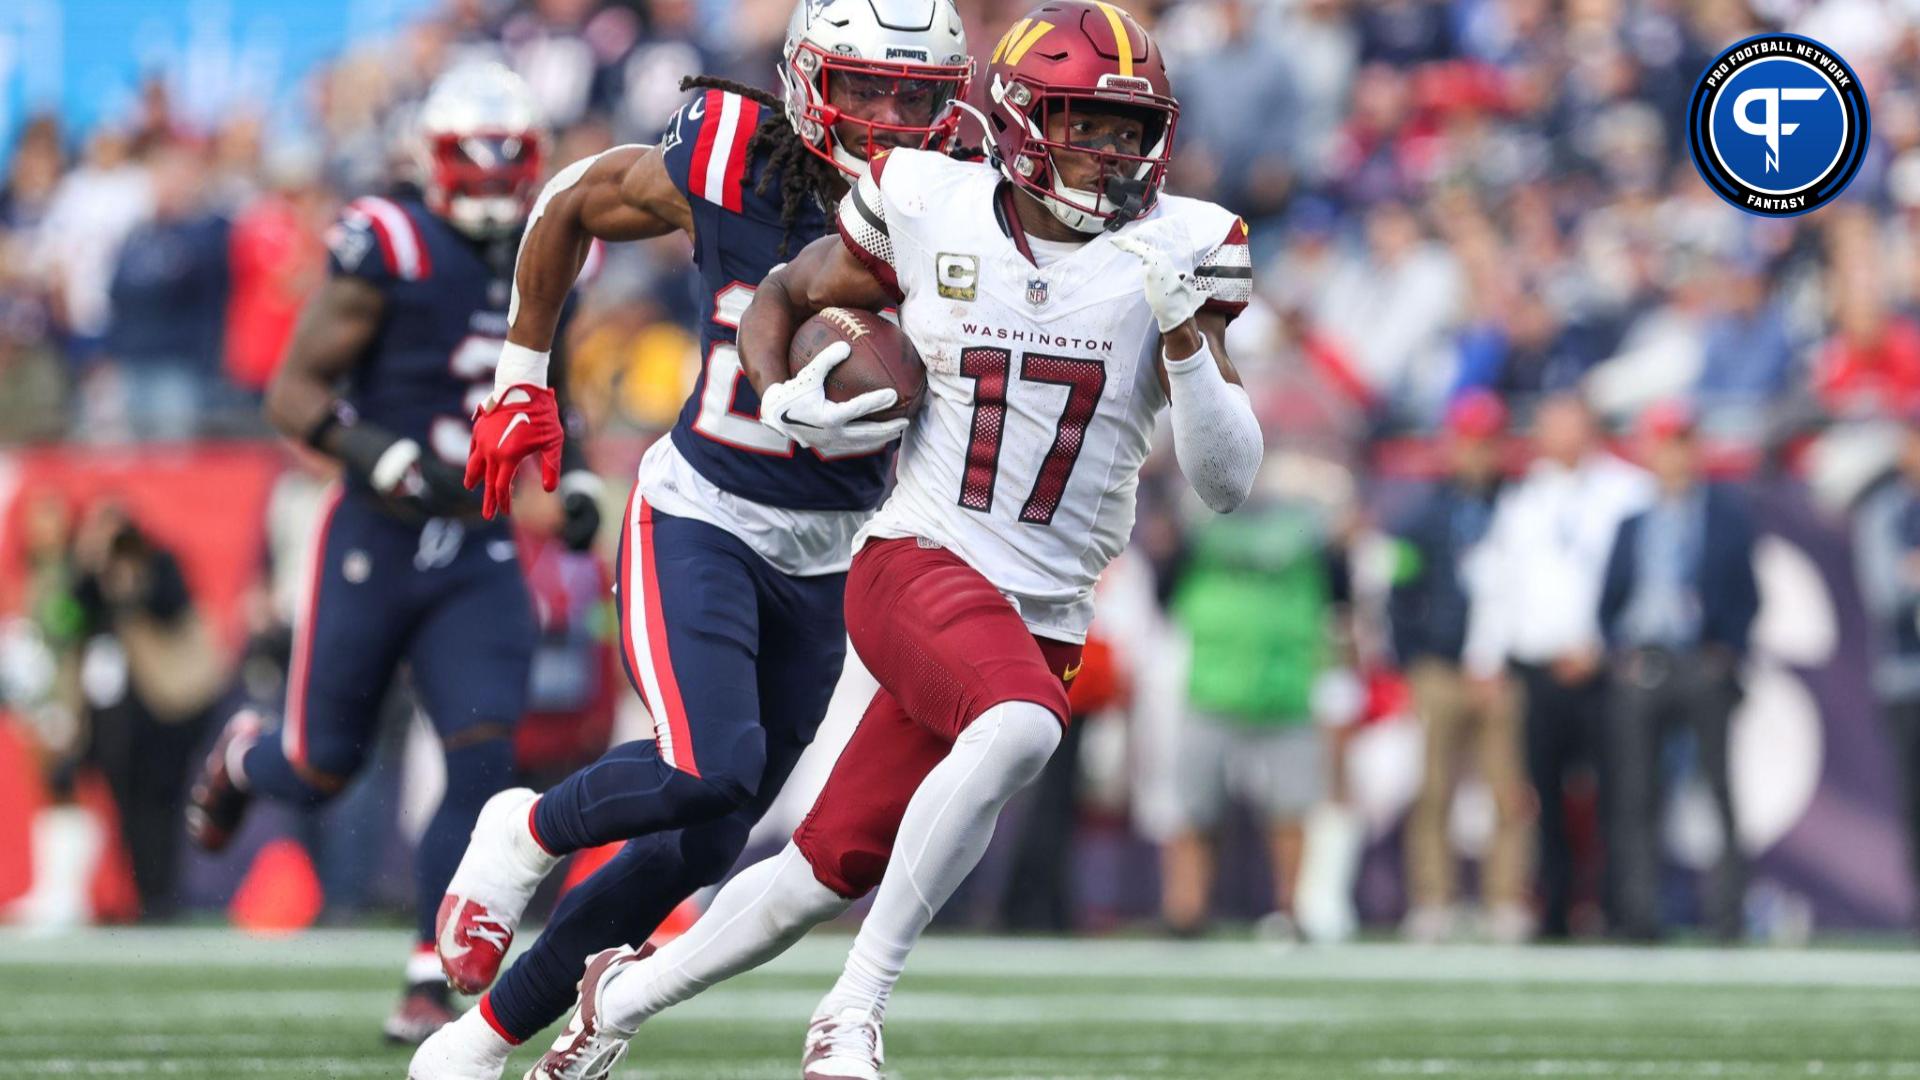 Washington Commanders receiver Terry McLaurin (17) runs the ball during the second half against the New England Patriots at Gillette Stadium.